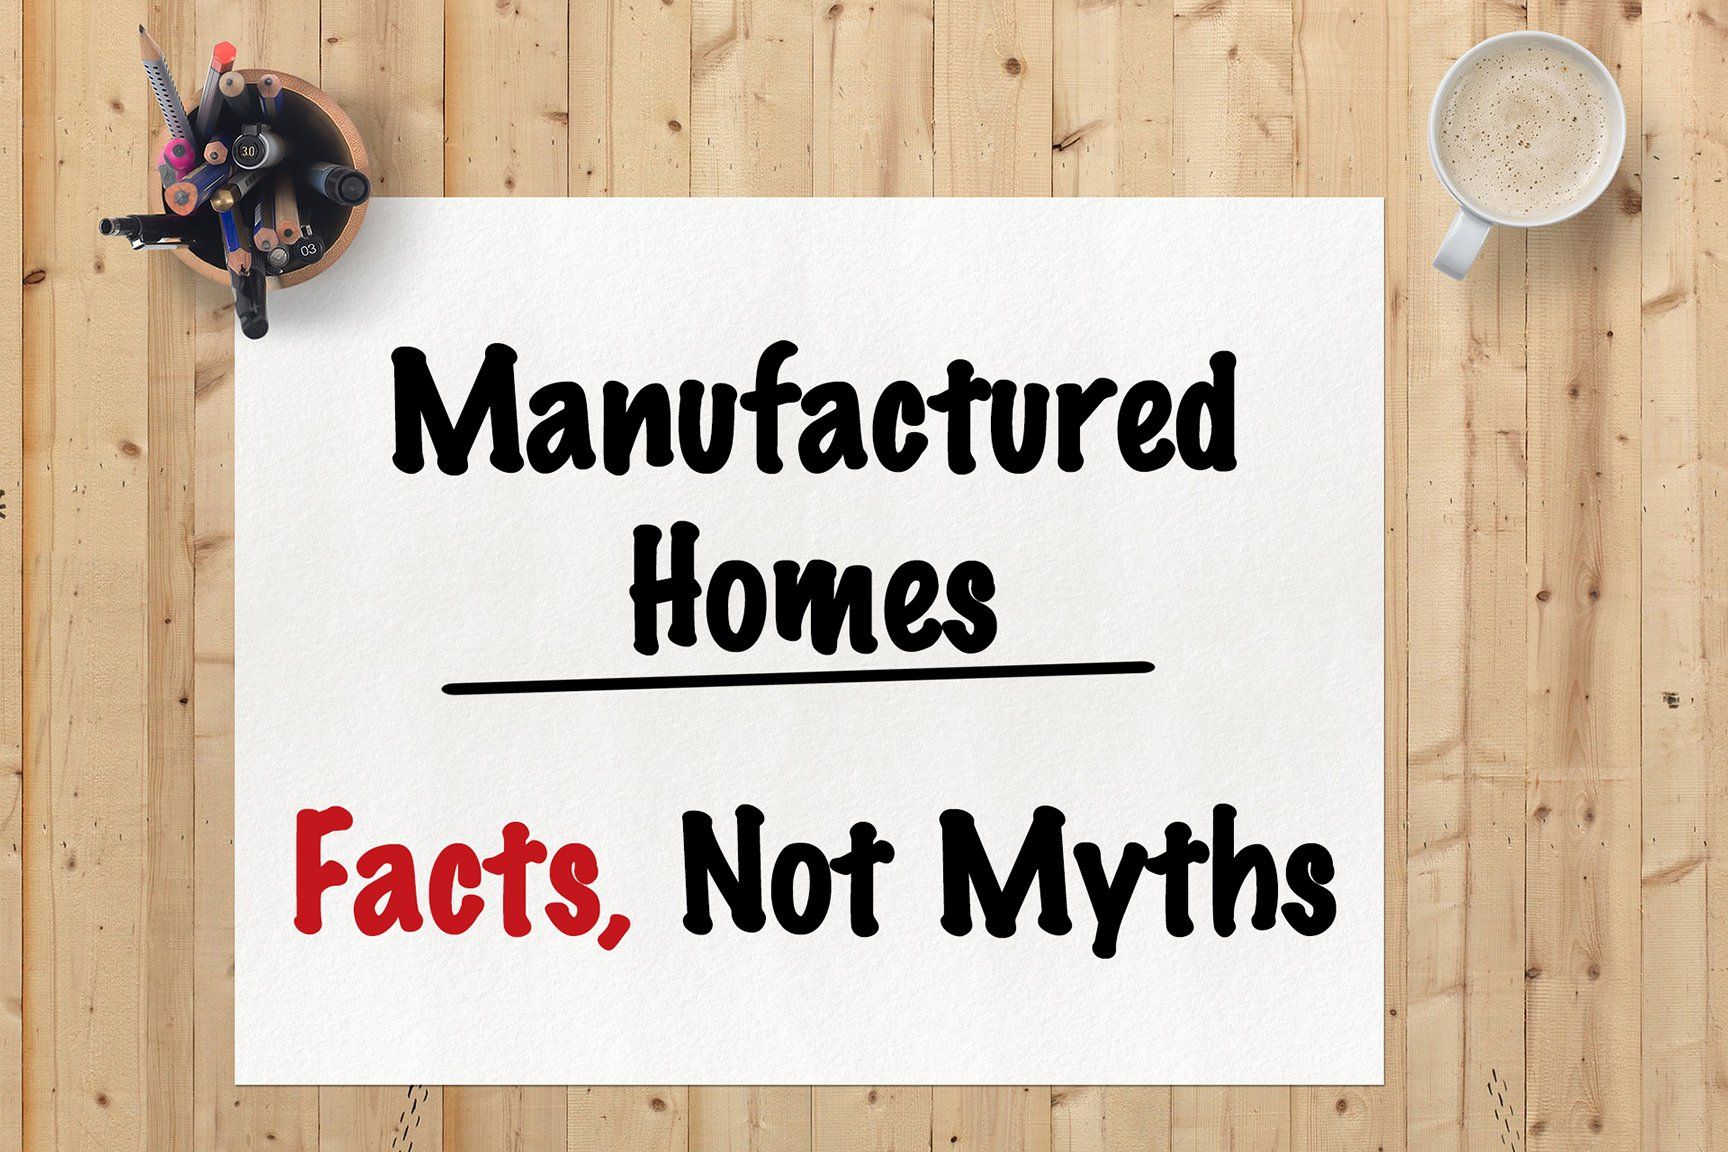 Myths About Manufactured Homes Part 2